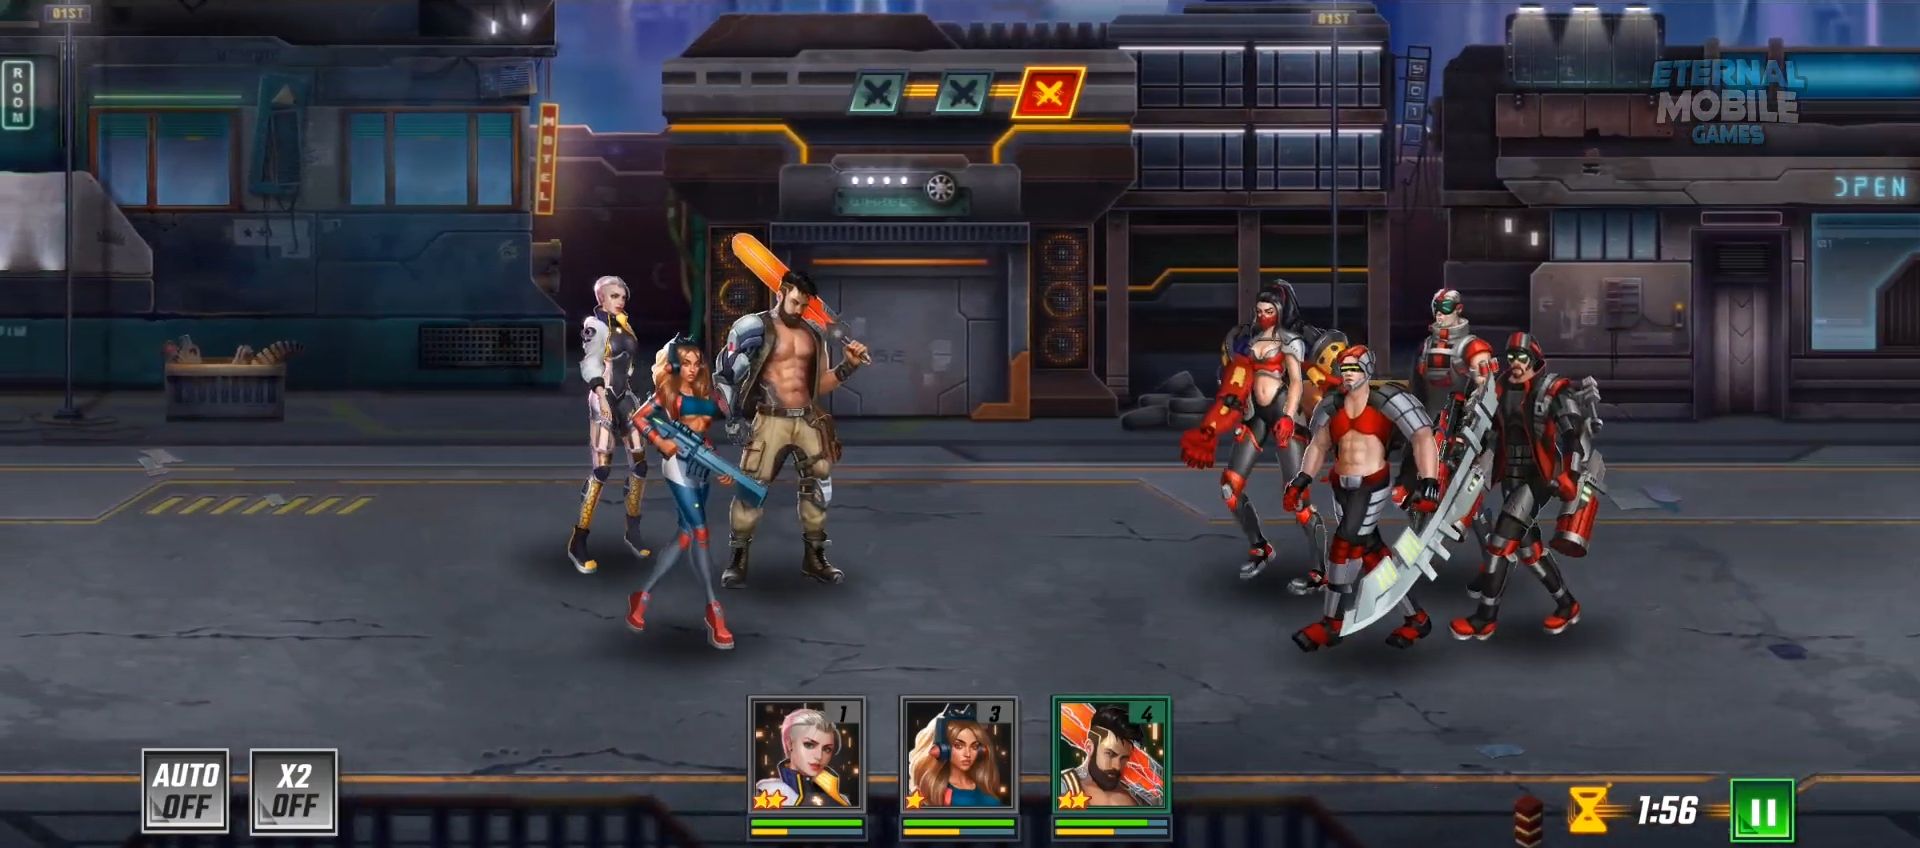 Gameplay of the Squad of Heroes: RPG battle for Android phone or tablet.